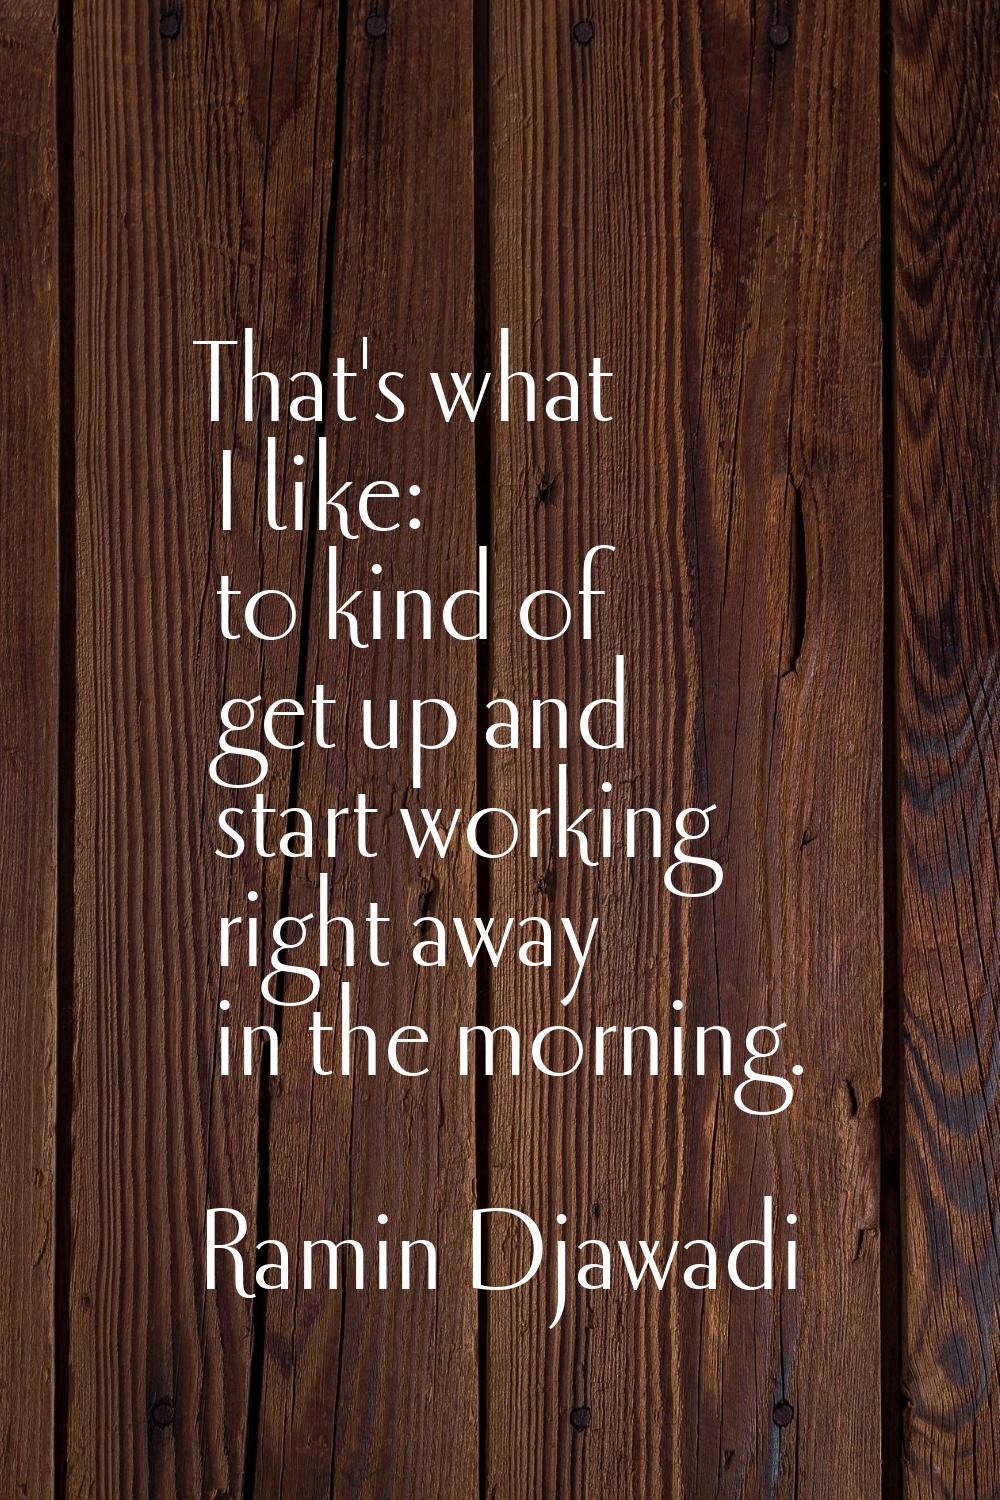 That's what I like: to kind of get up and start working right away in the morning.